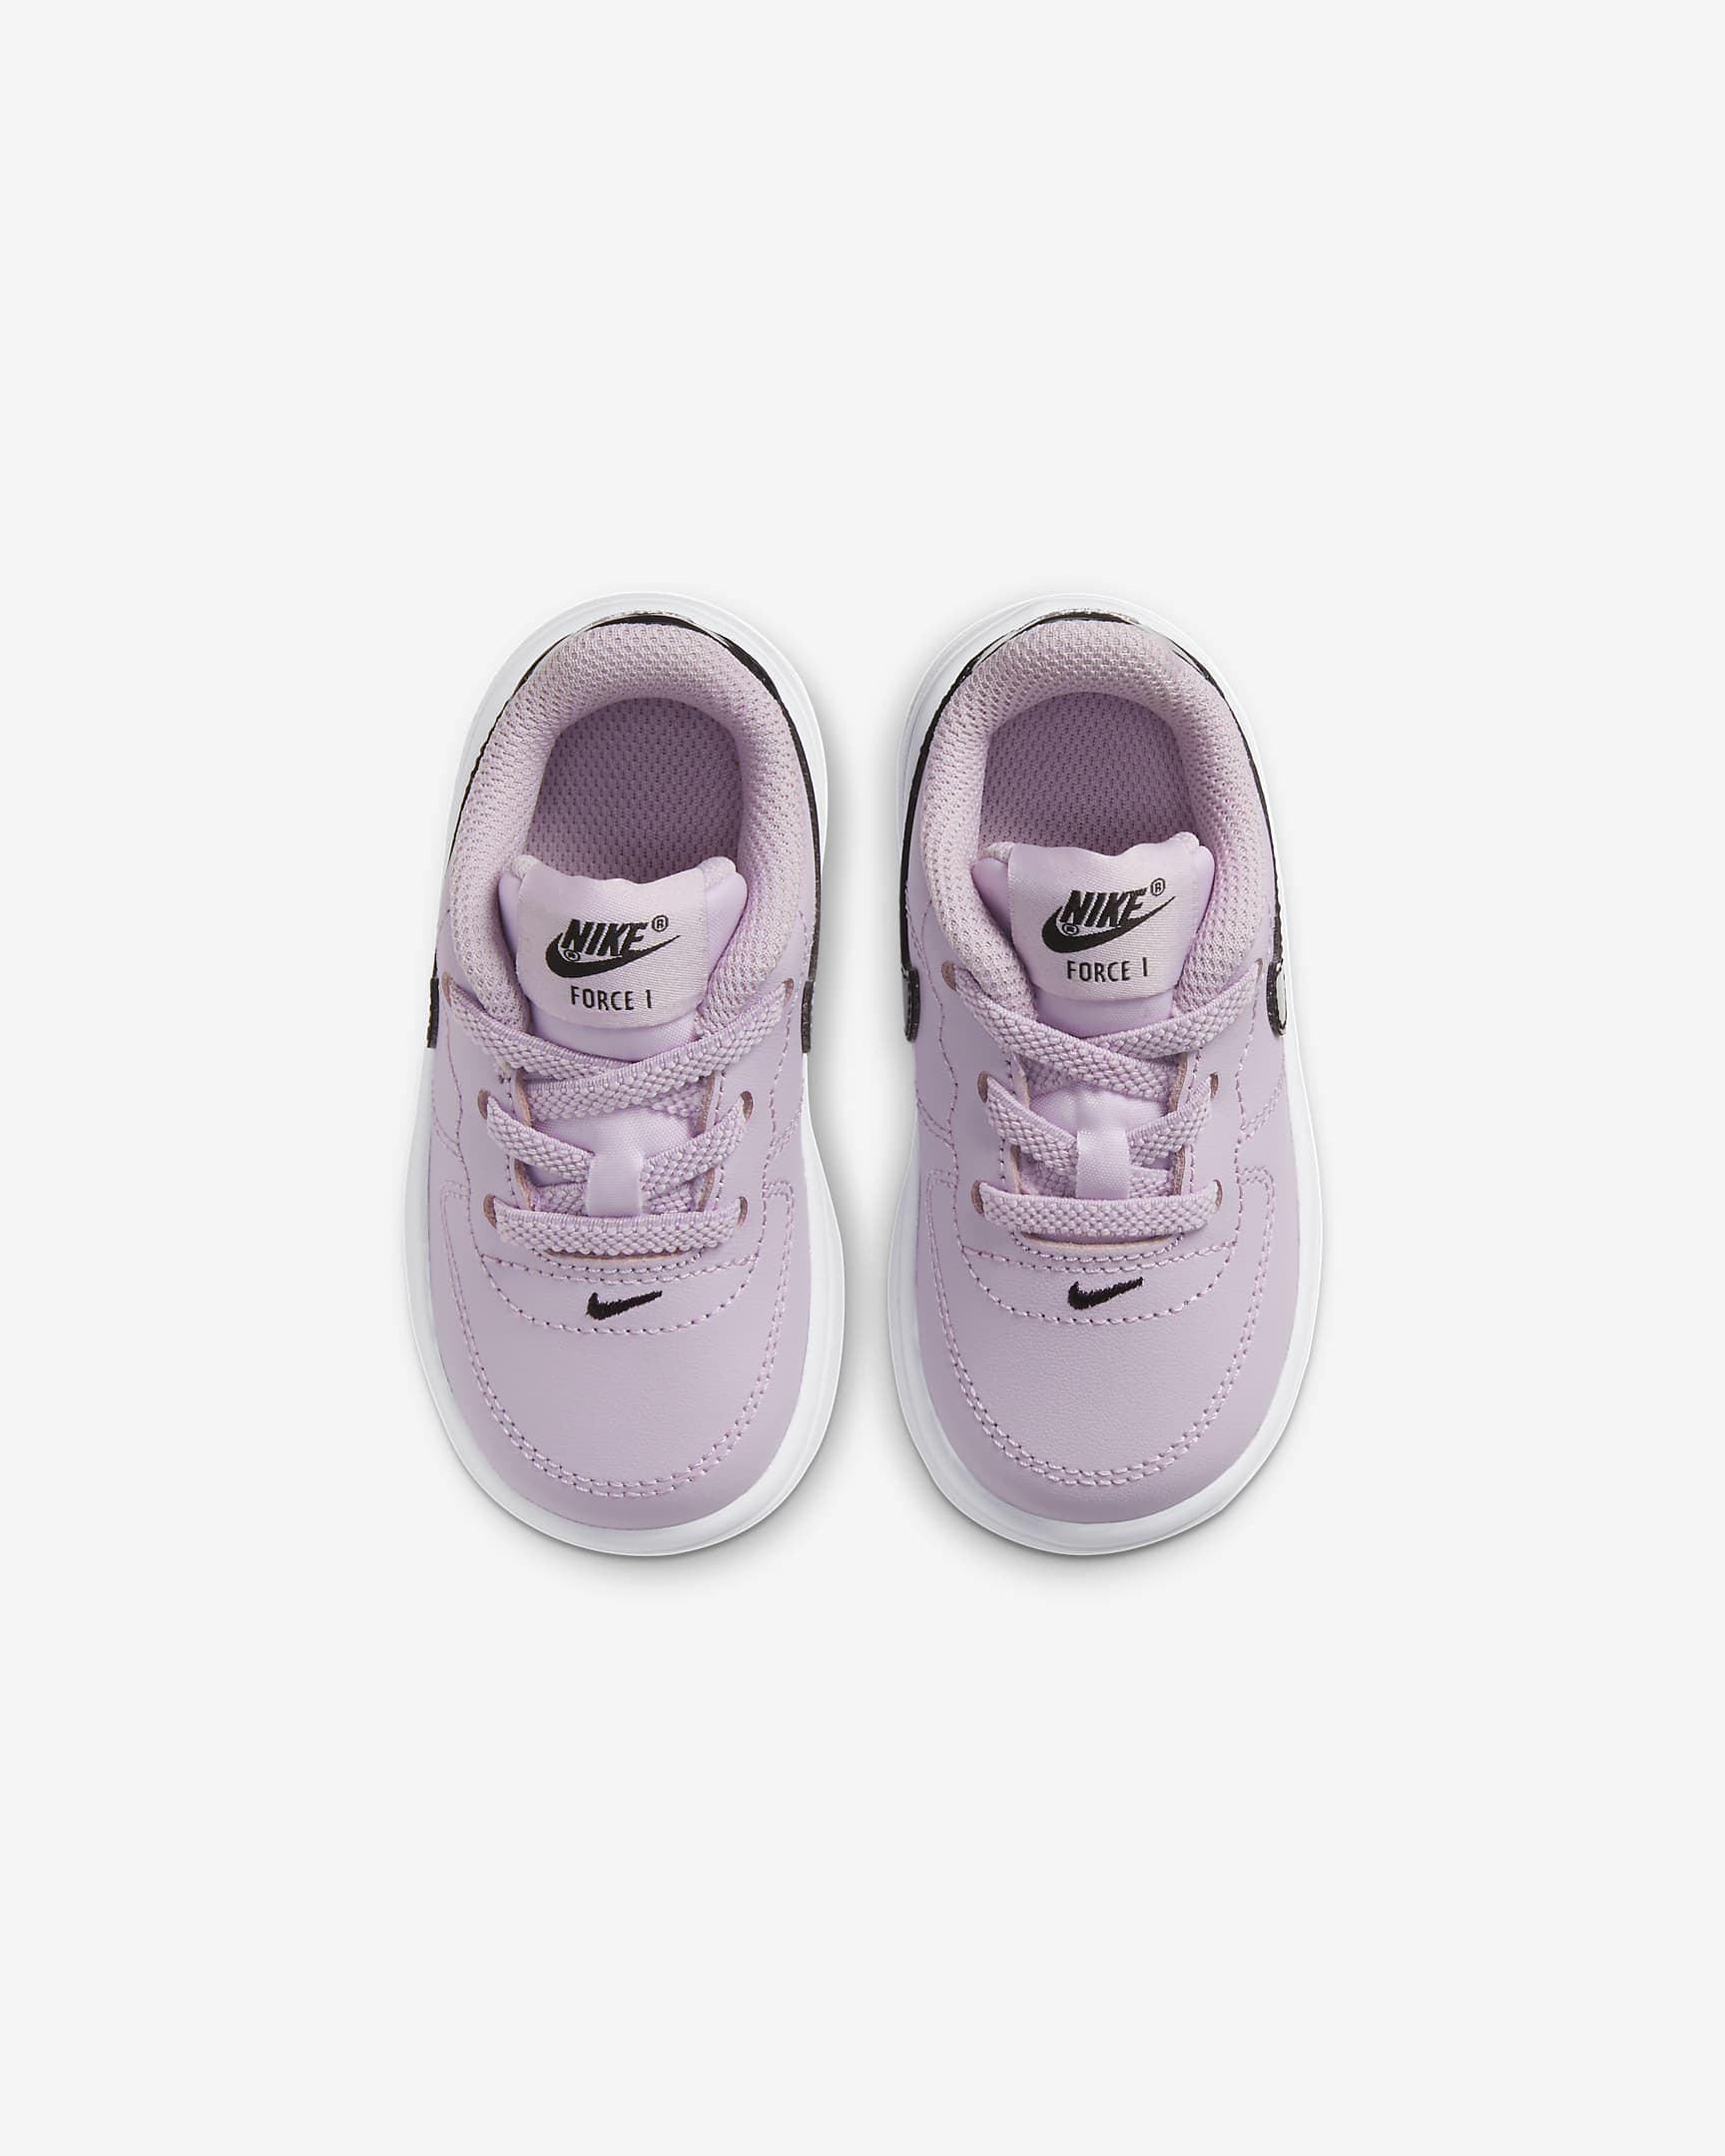 Nike Force 1 '18 Baby/Toddler Shoes. Nike CA